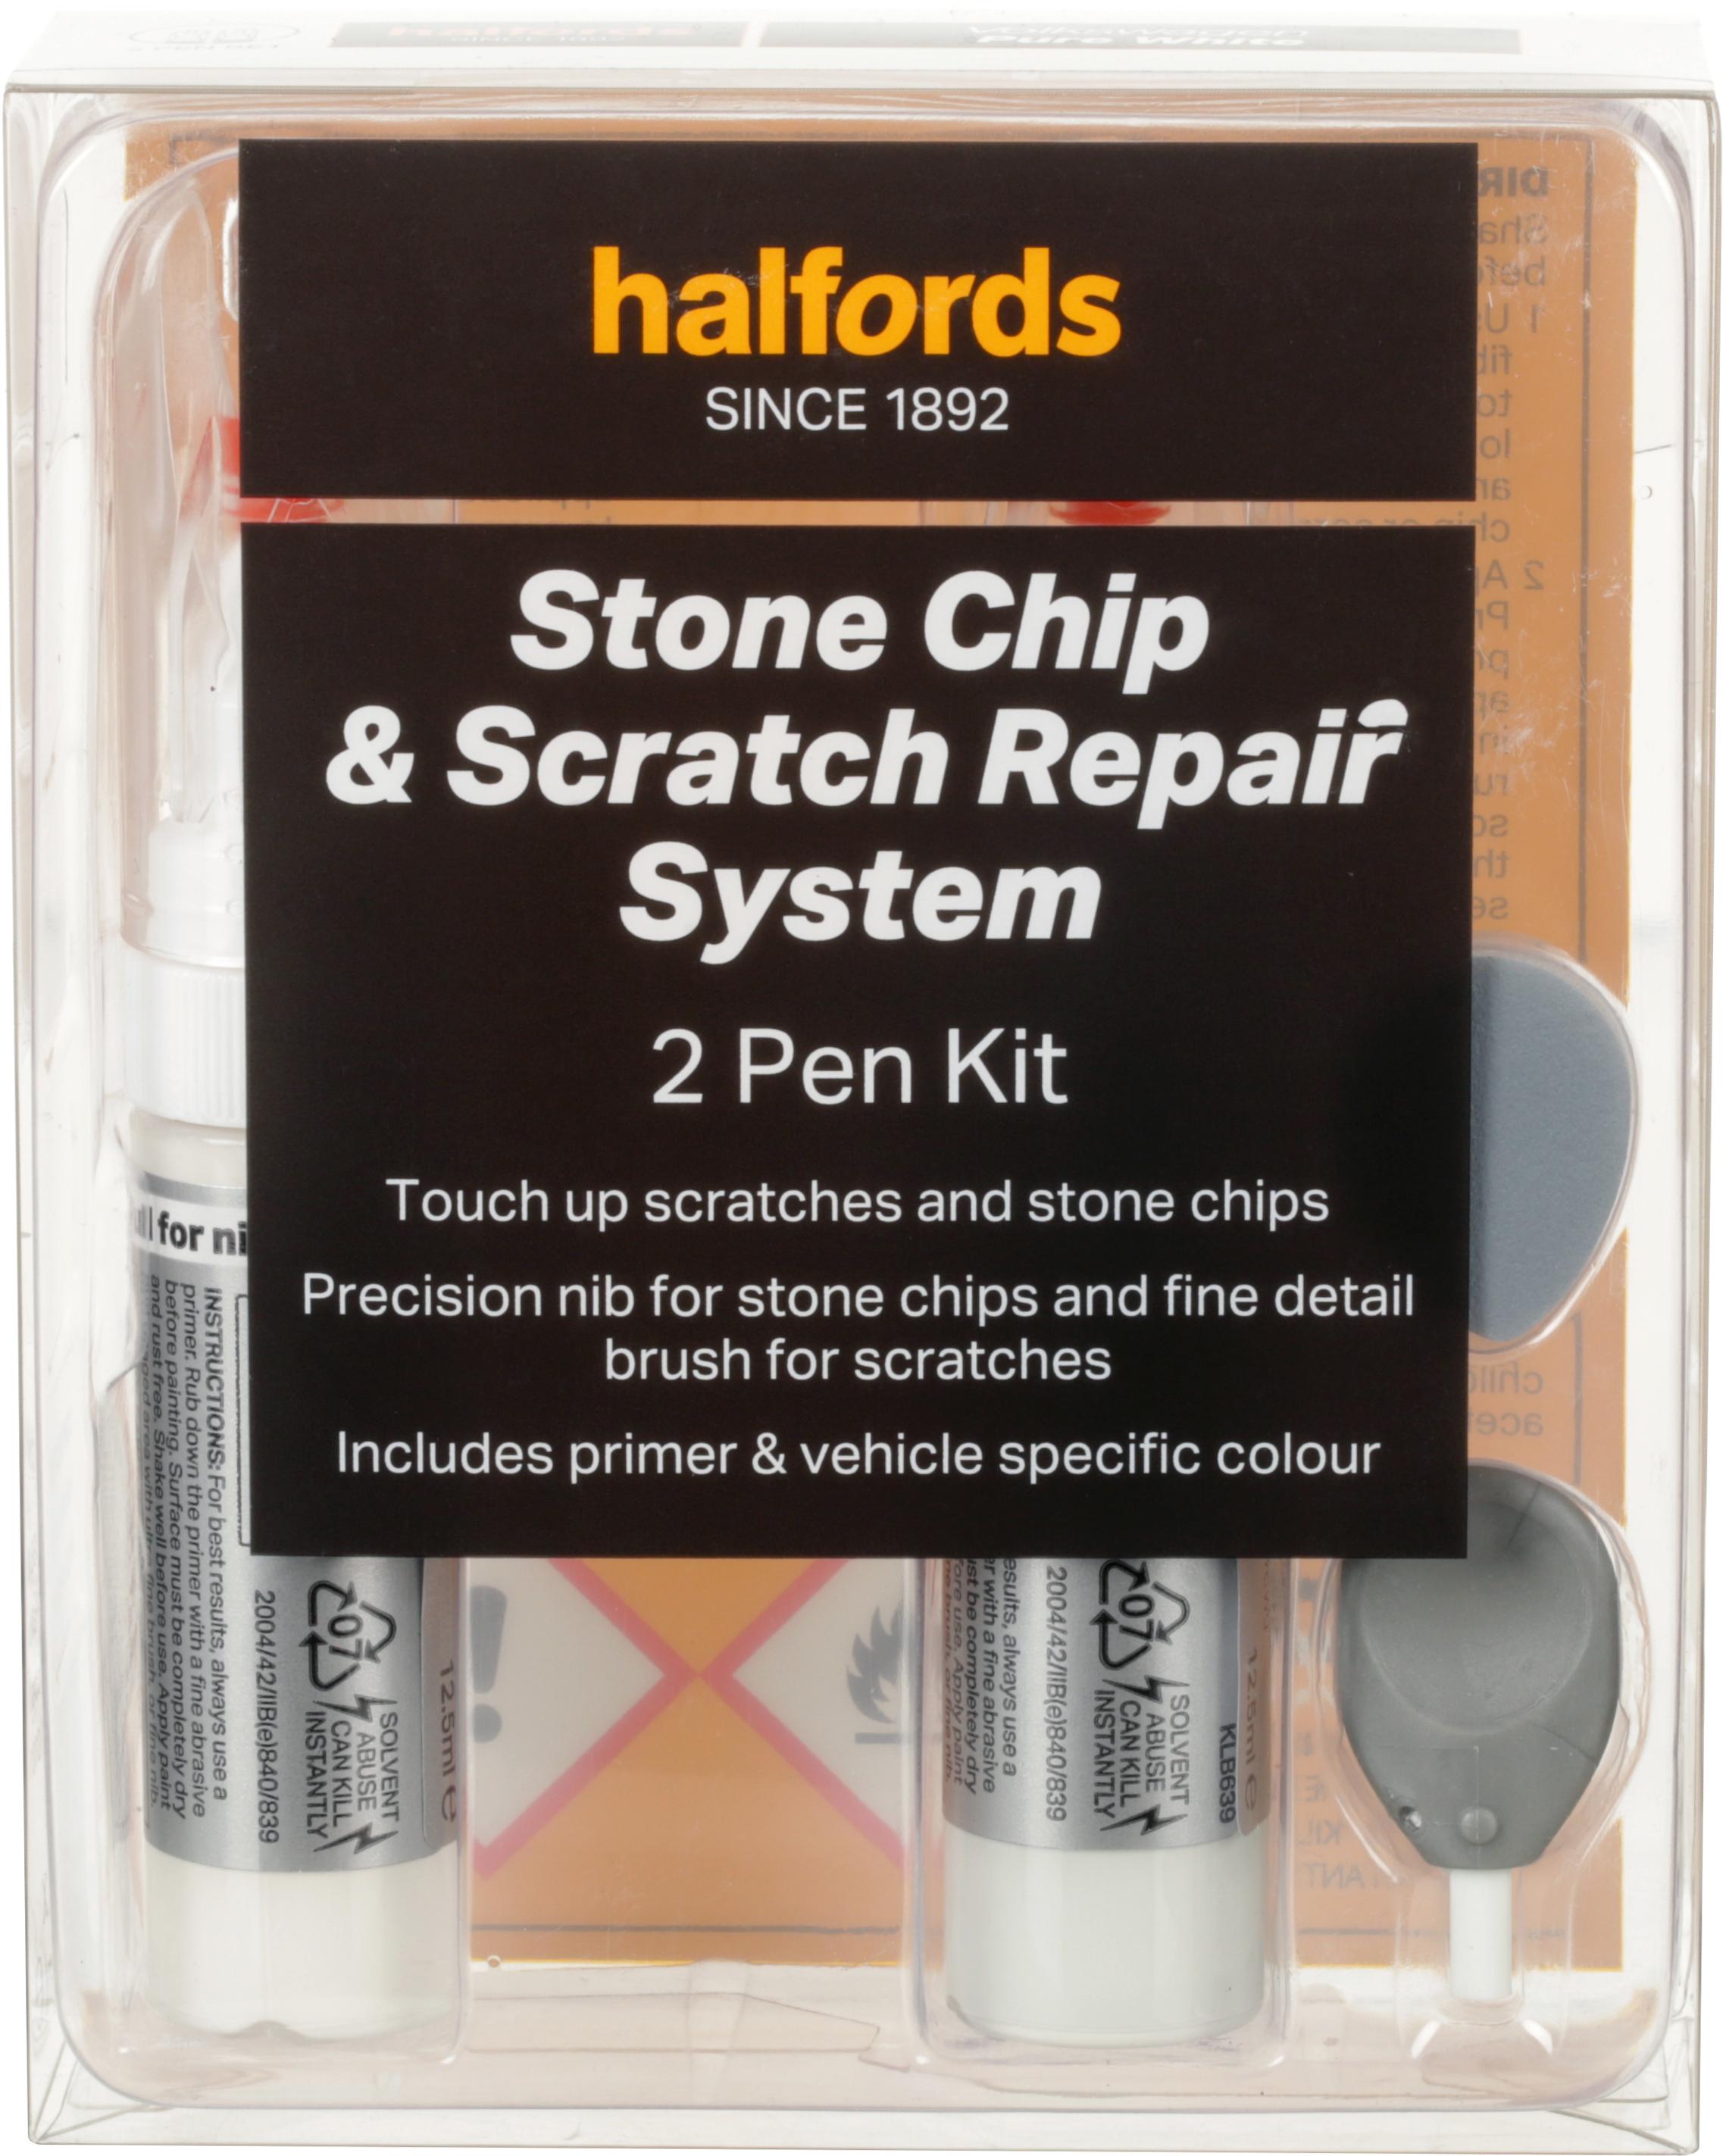 Halfords Vw Pure White Scratch & Chip Repair Kit